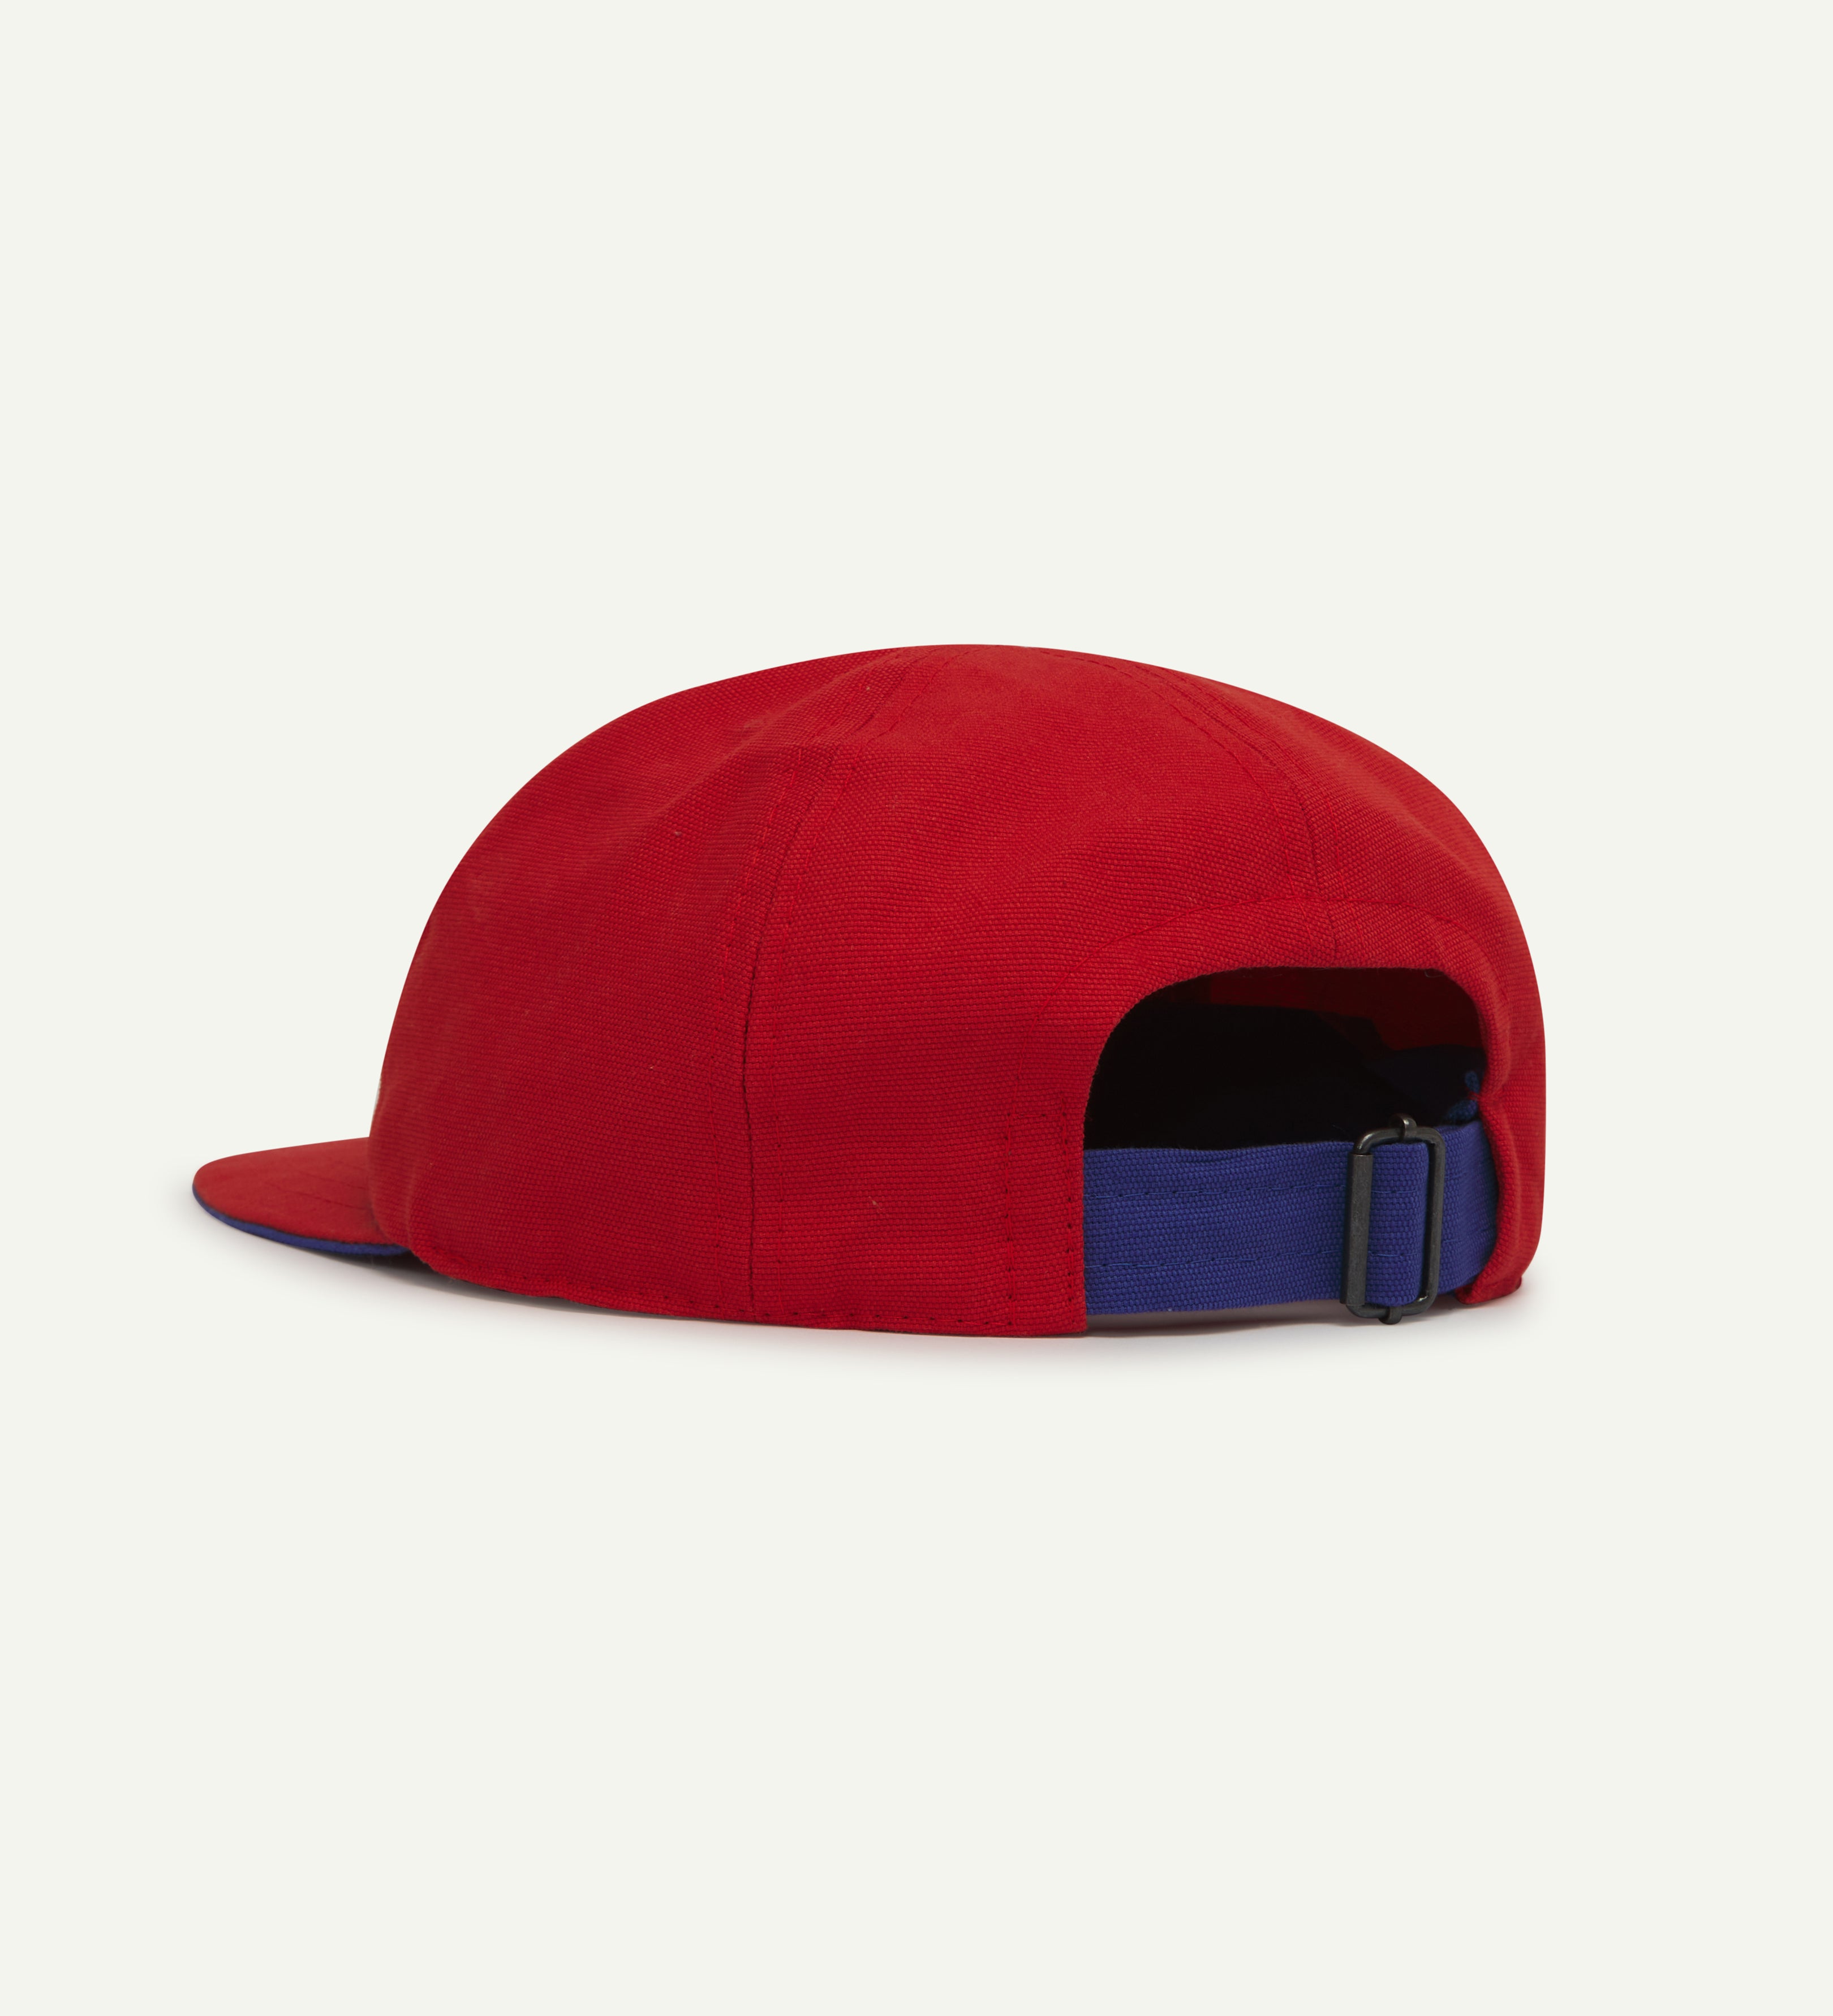 Back view of Uskees deadstock 6-panel cap in red with contrast blue adjuster loop at back